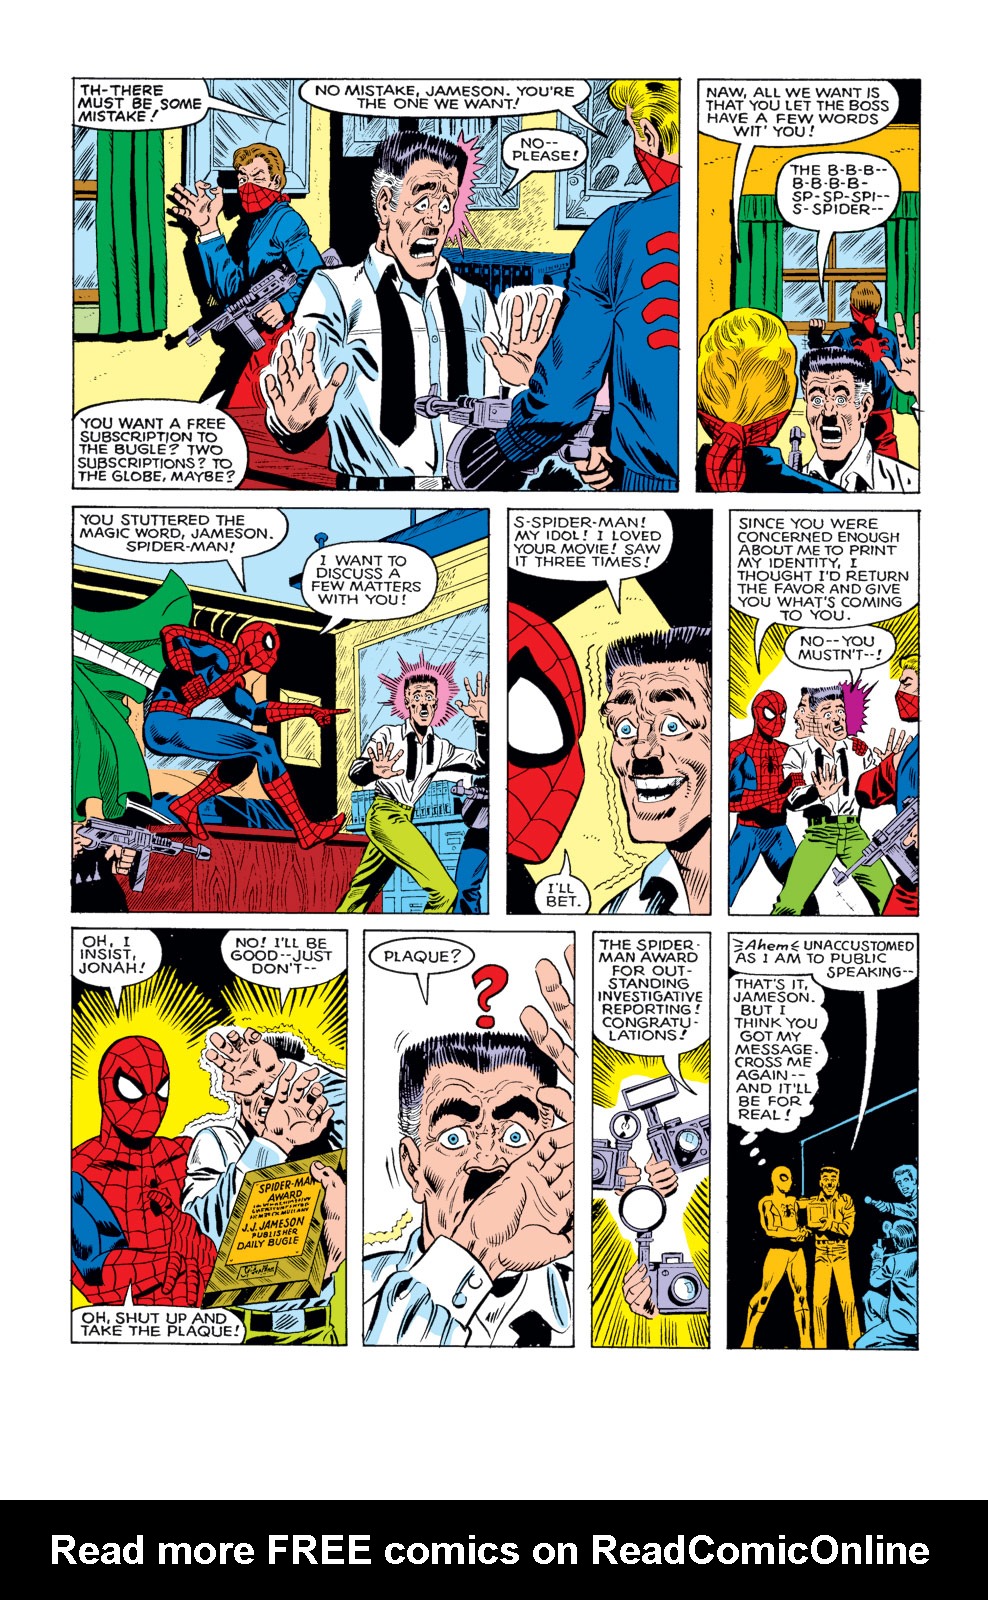 What If? (1977) issue 19 - Spider-Man had never become a crimefighter - Page 13